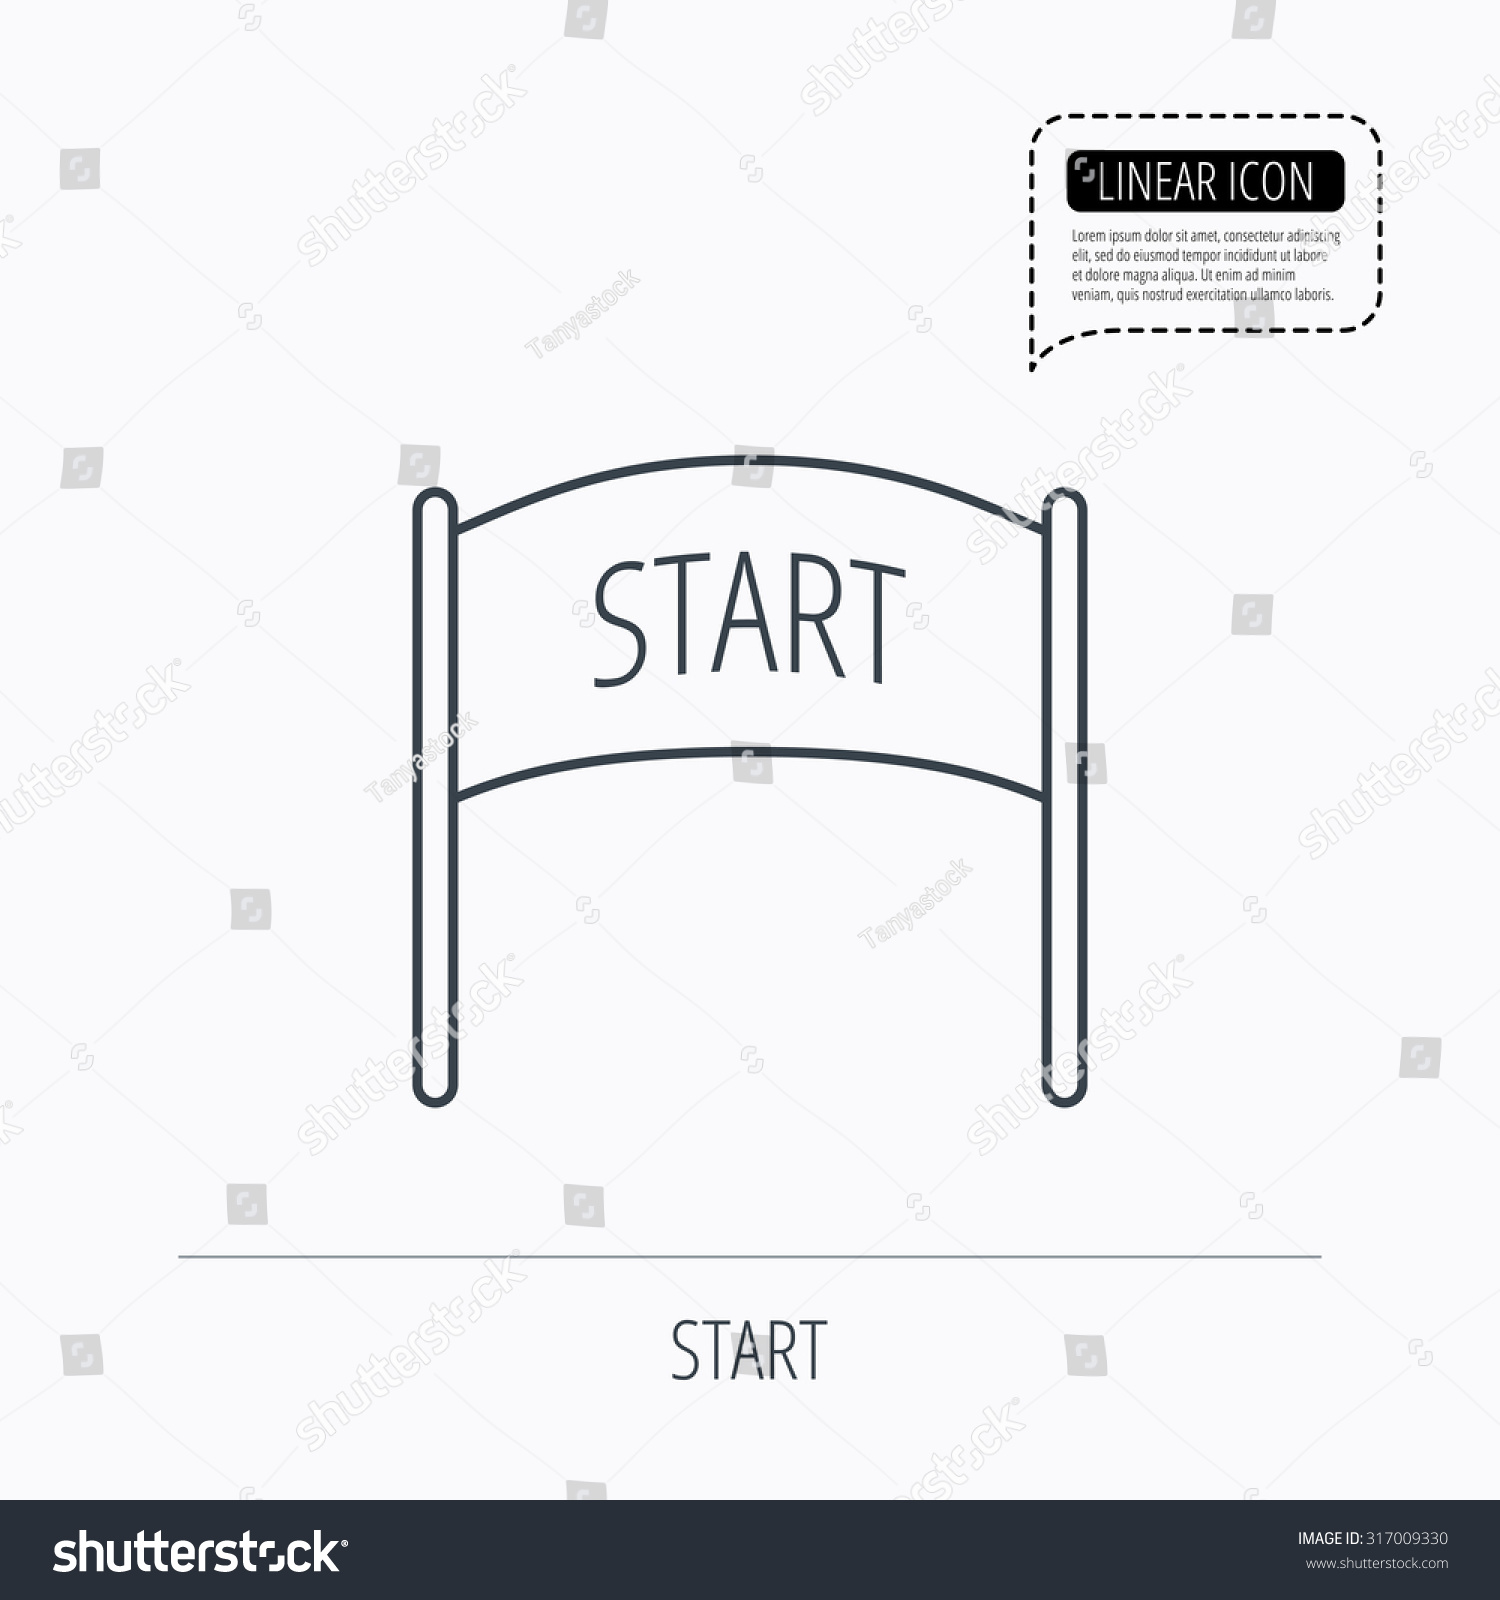 starting line clip art images - photo #39